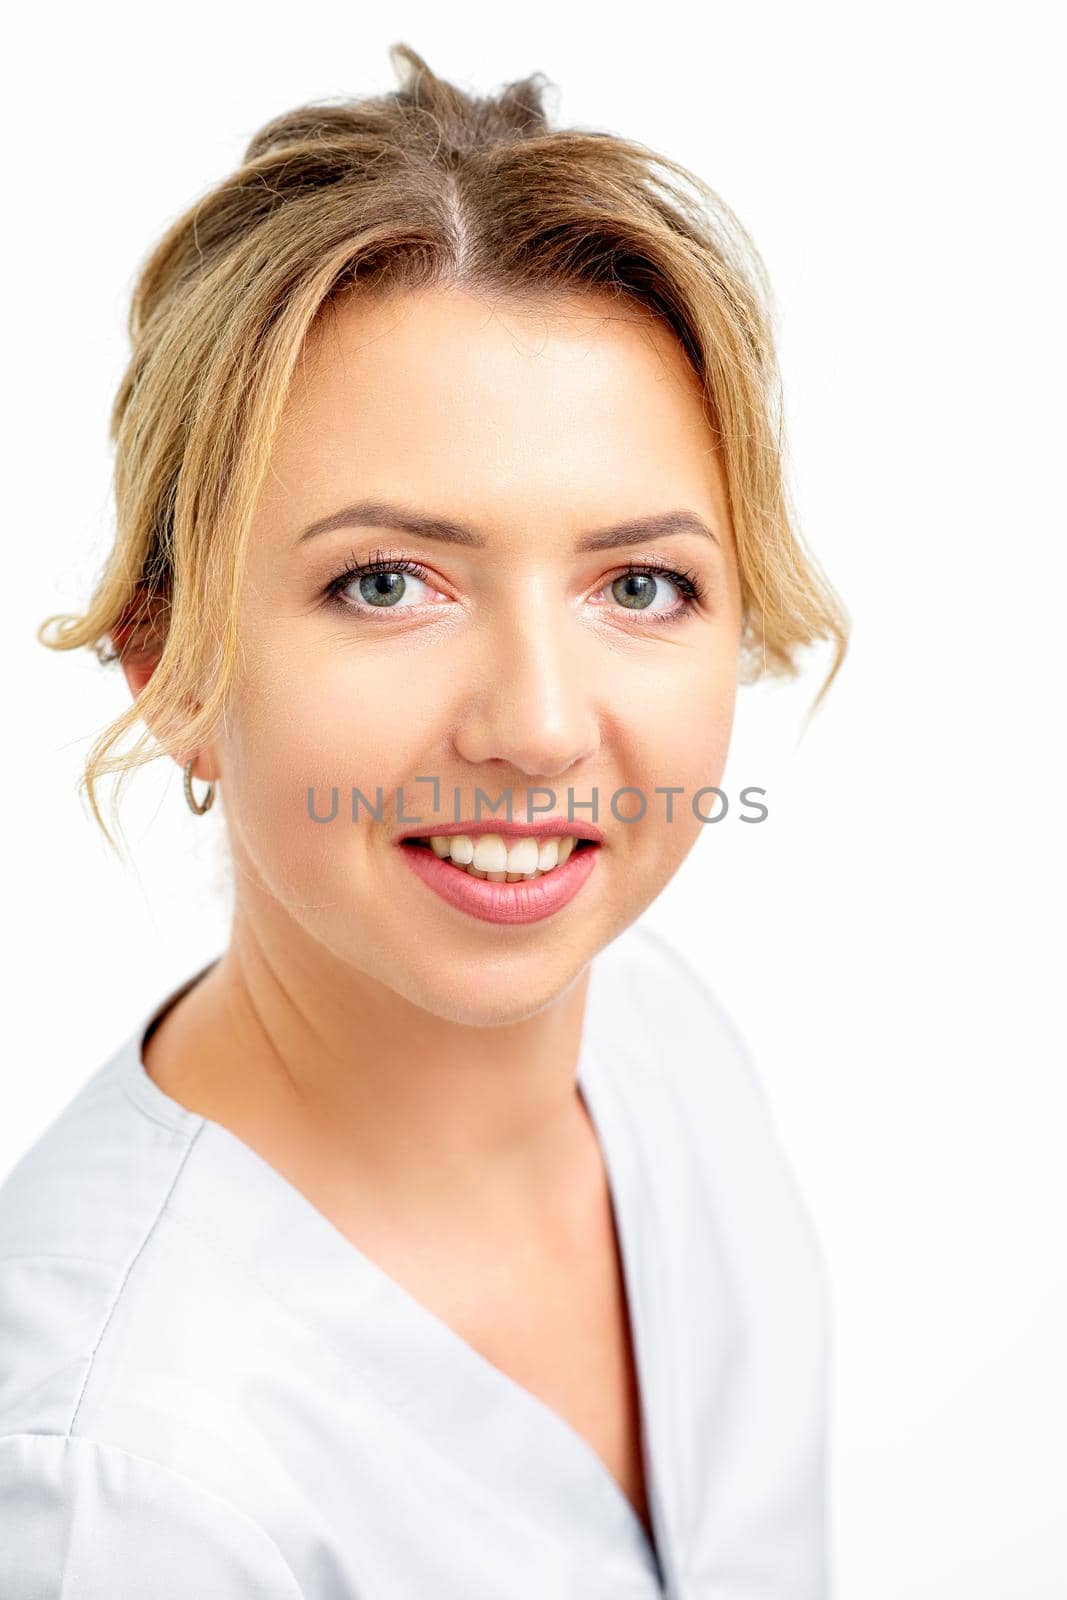 Close-up portrait of young smiling female caucasian healthcare worker standing staring at the camera on white background. by okskukuruza